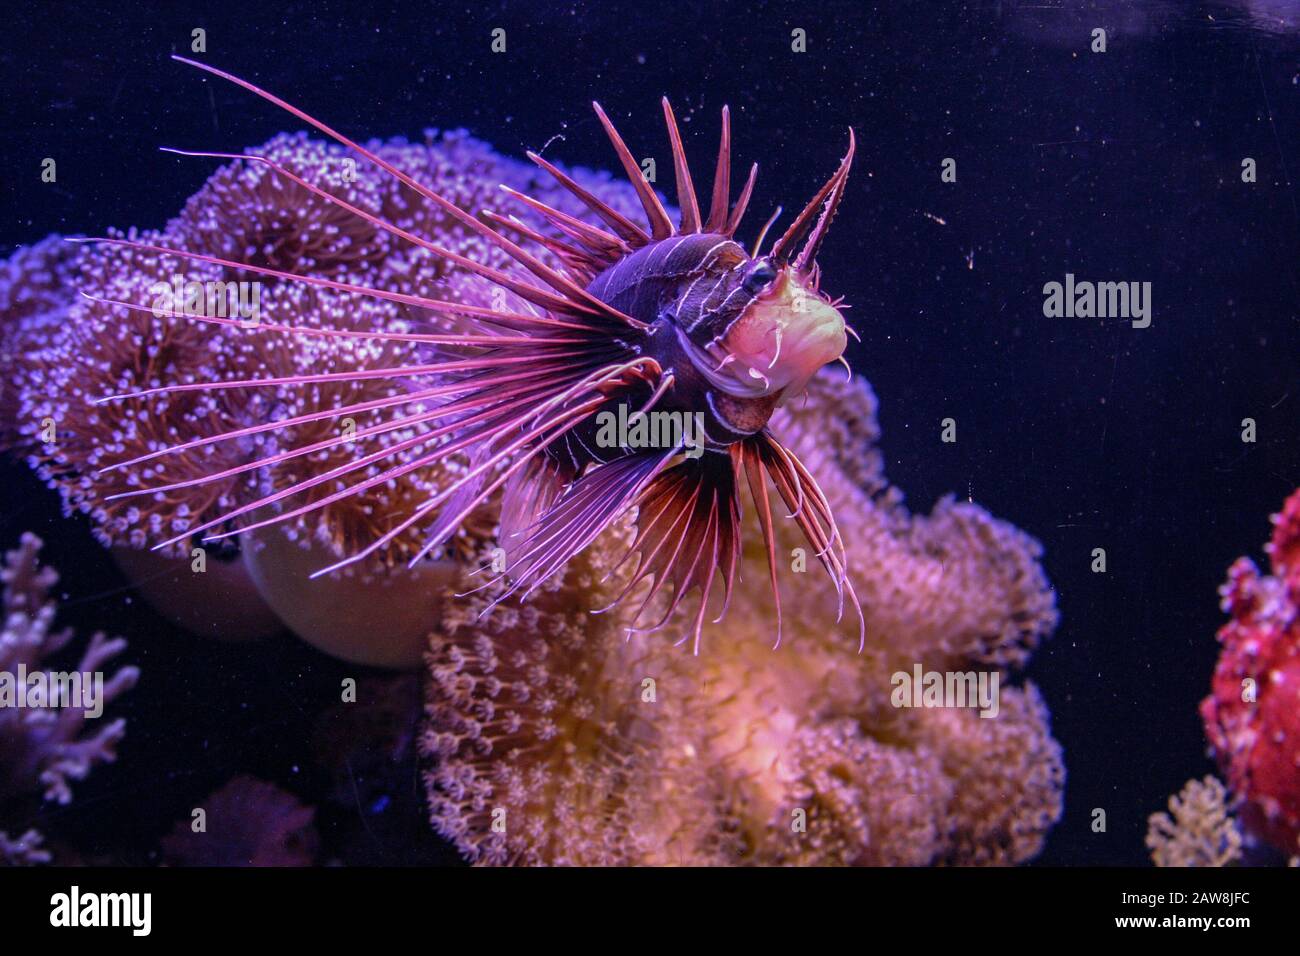 Underwater photograph of a Clearfin Lionfish (Pterois radiata) Photographed in the Red Sea, Eilat, Israel Stock Photo